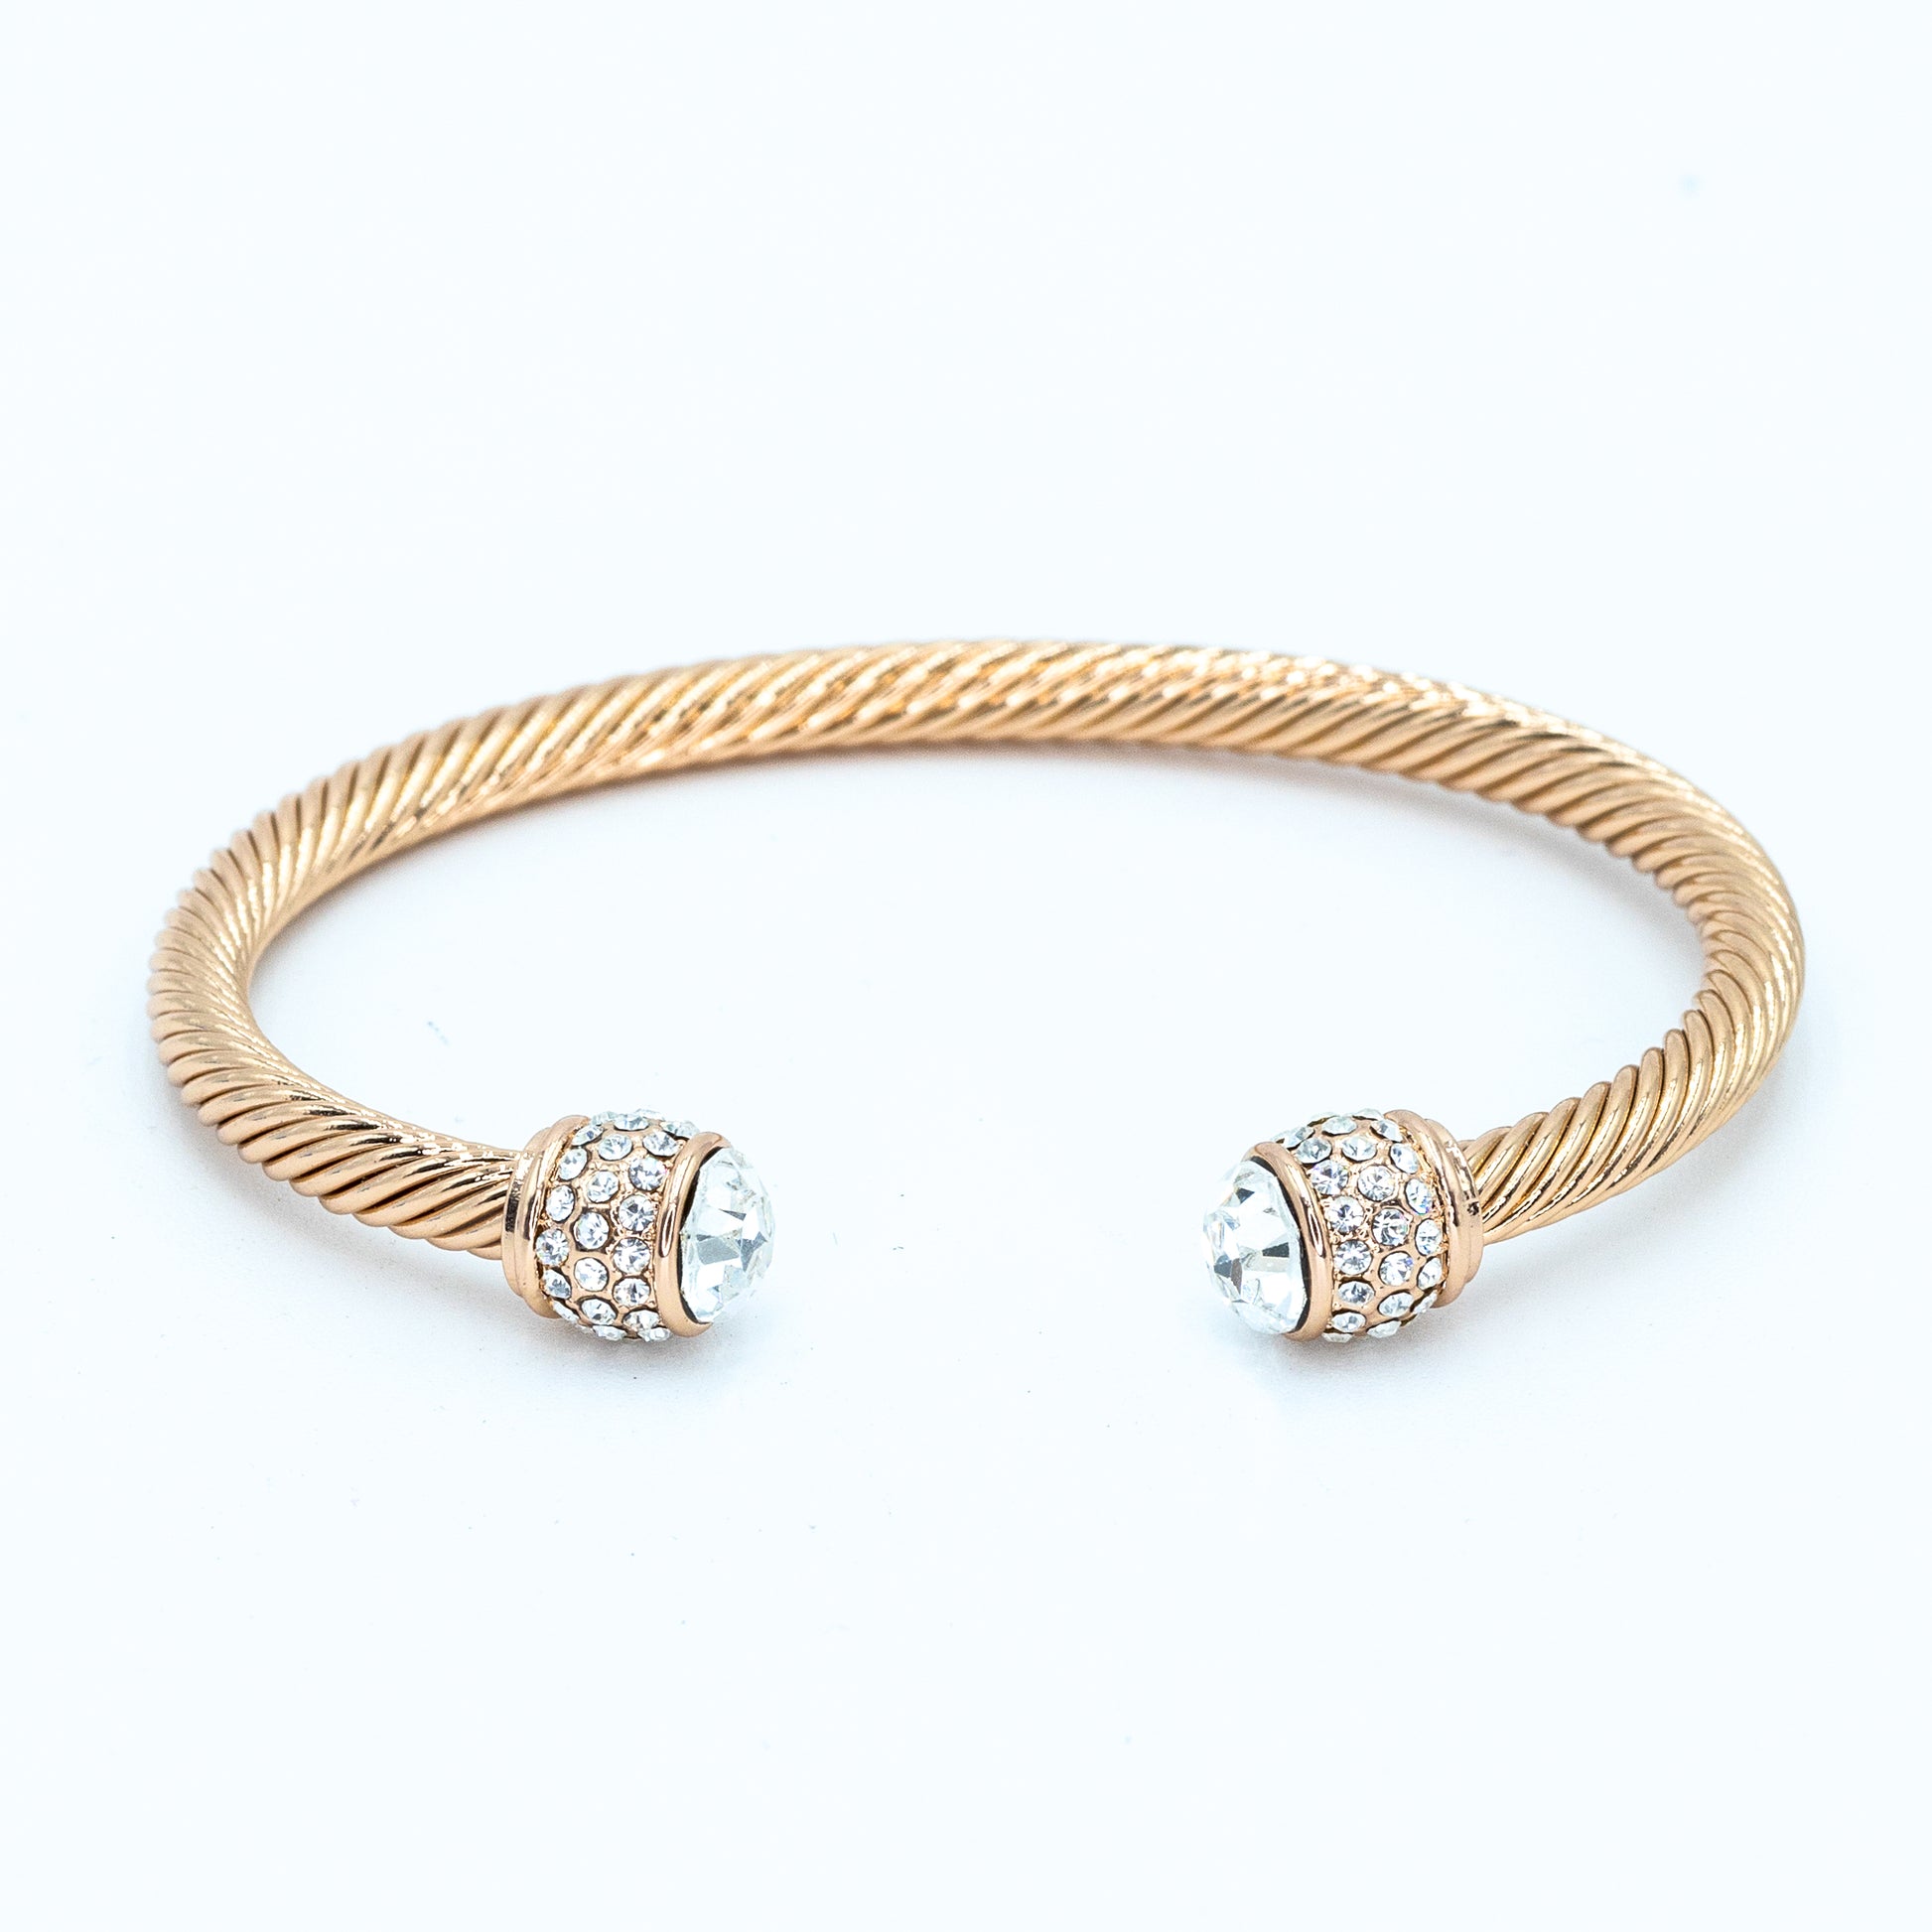 Rosegold plated bangle w/ CZ stones and clear stone Default Title